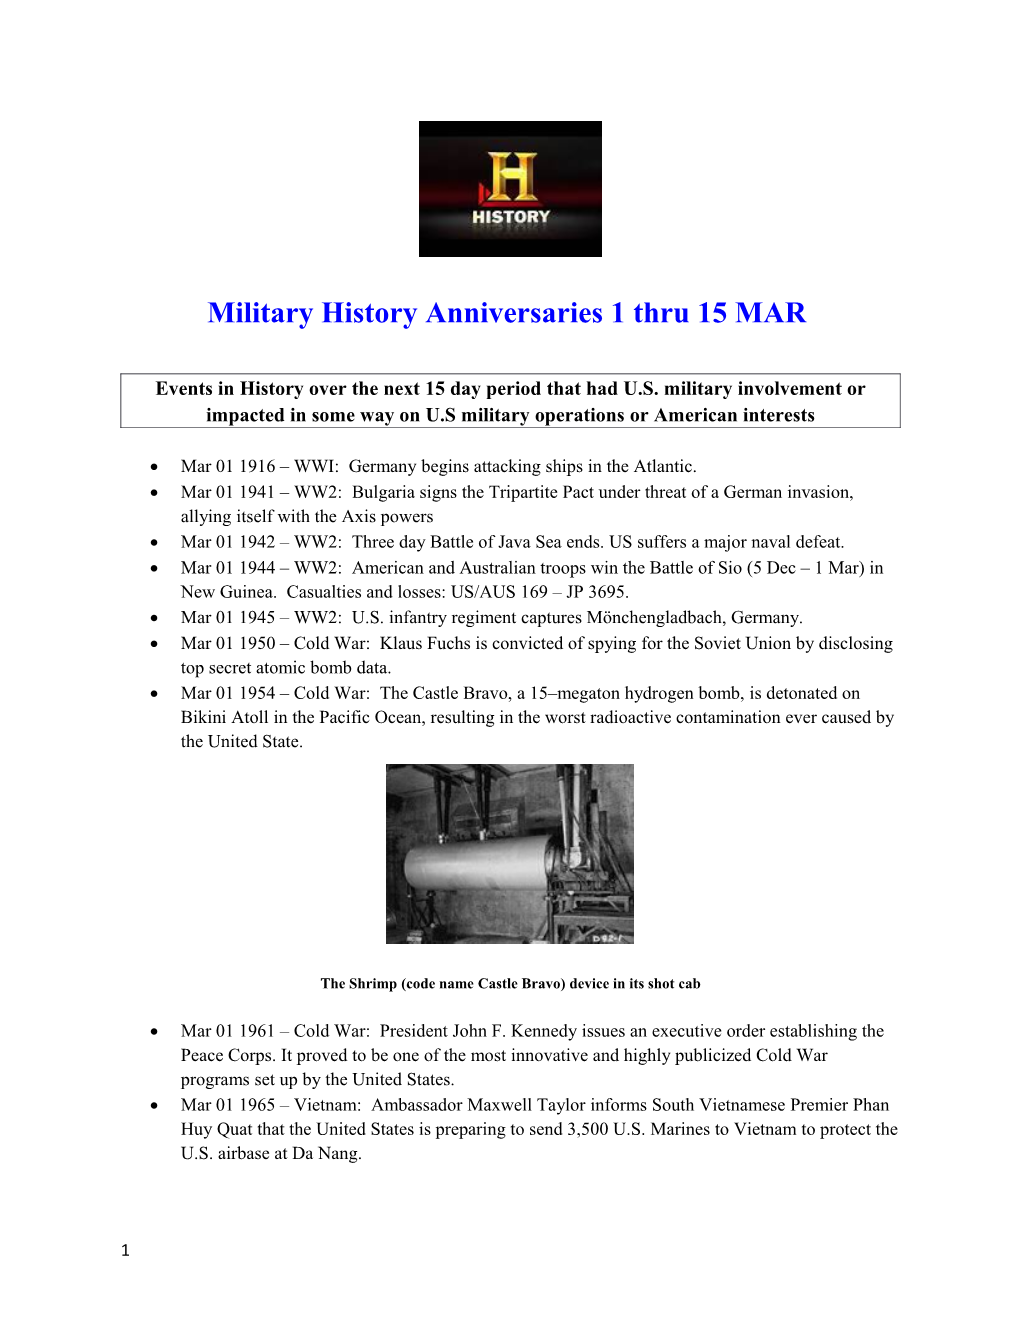 Events in History Over the Next 15 Day Period That Had U.S. Military Involvement Or